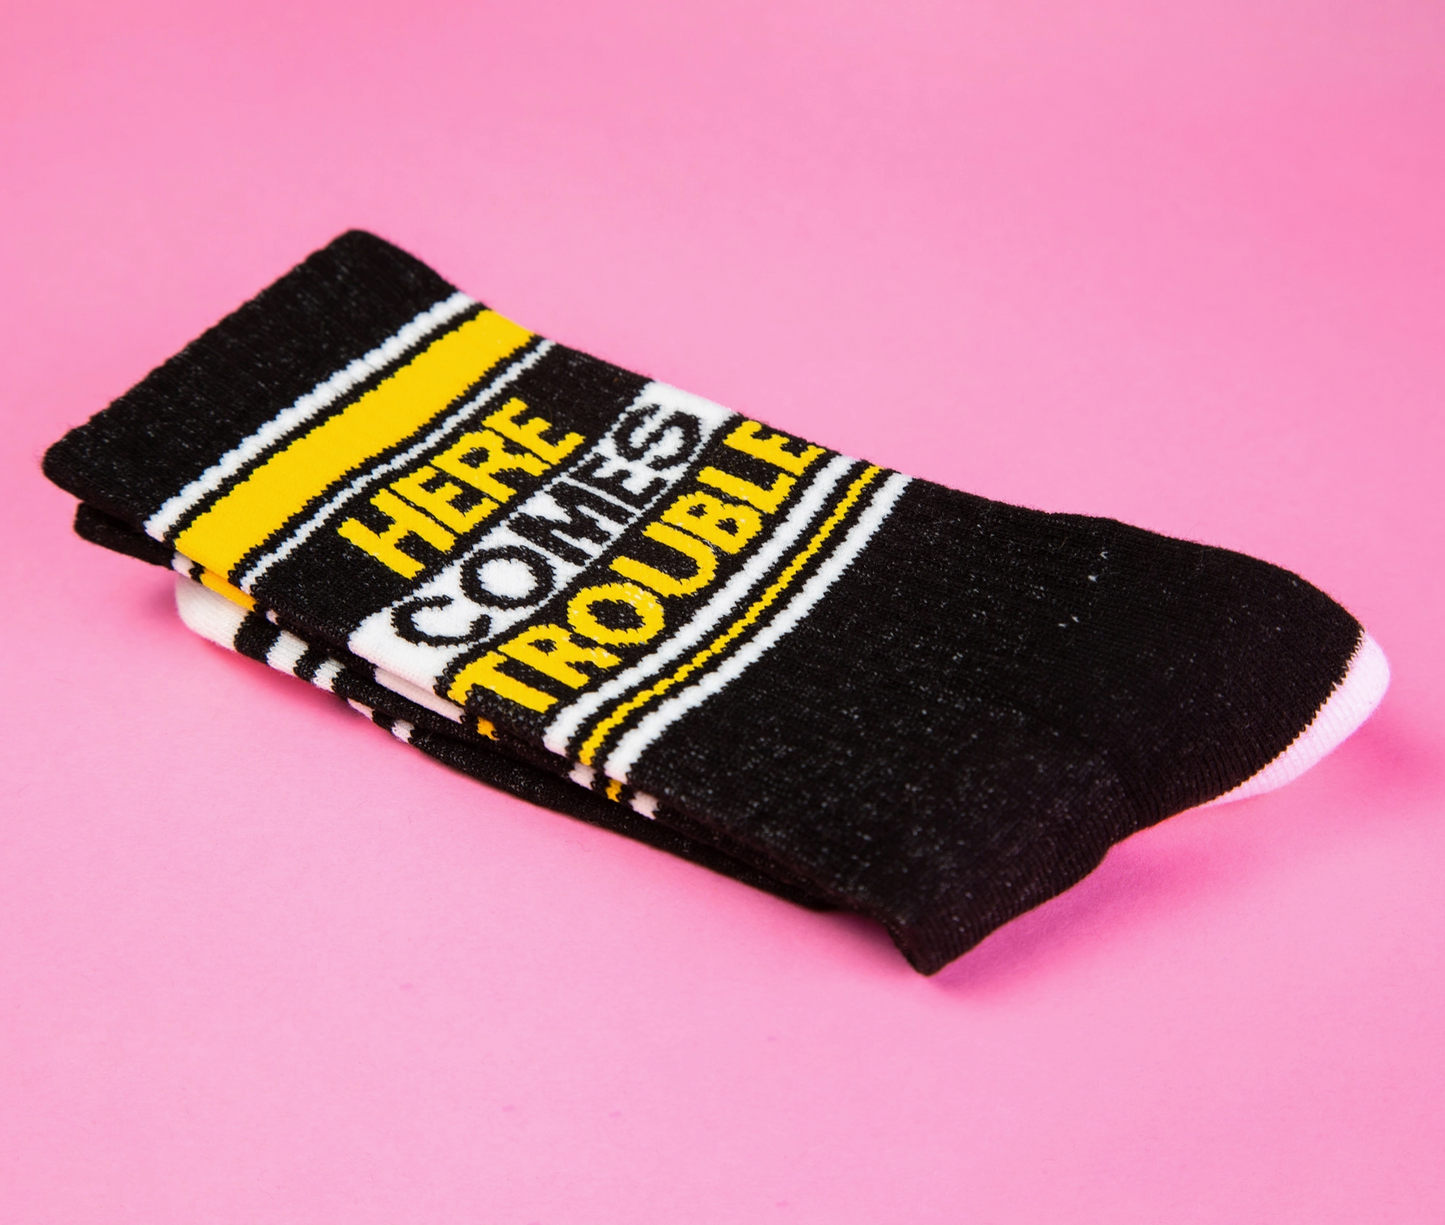 Here Comes Trouble Socks